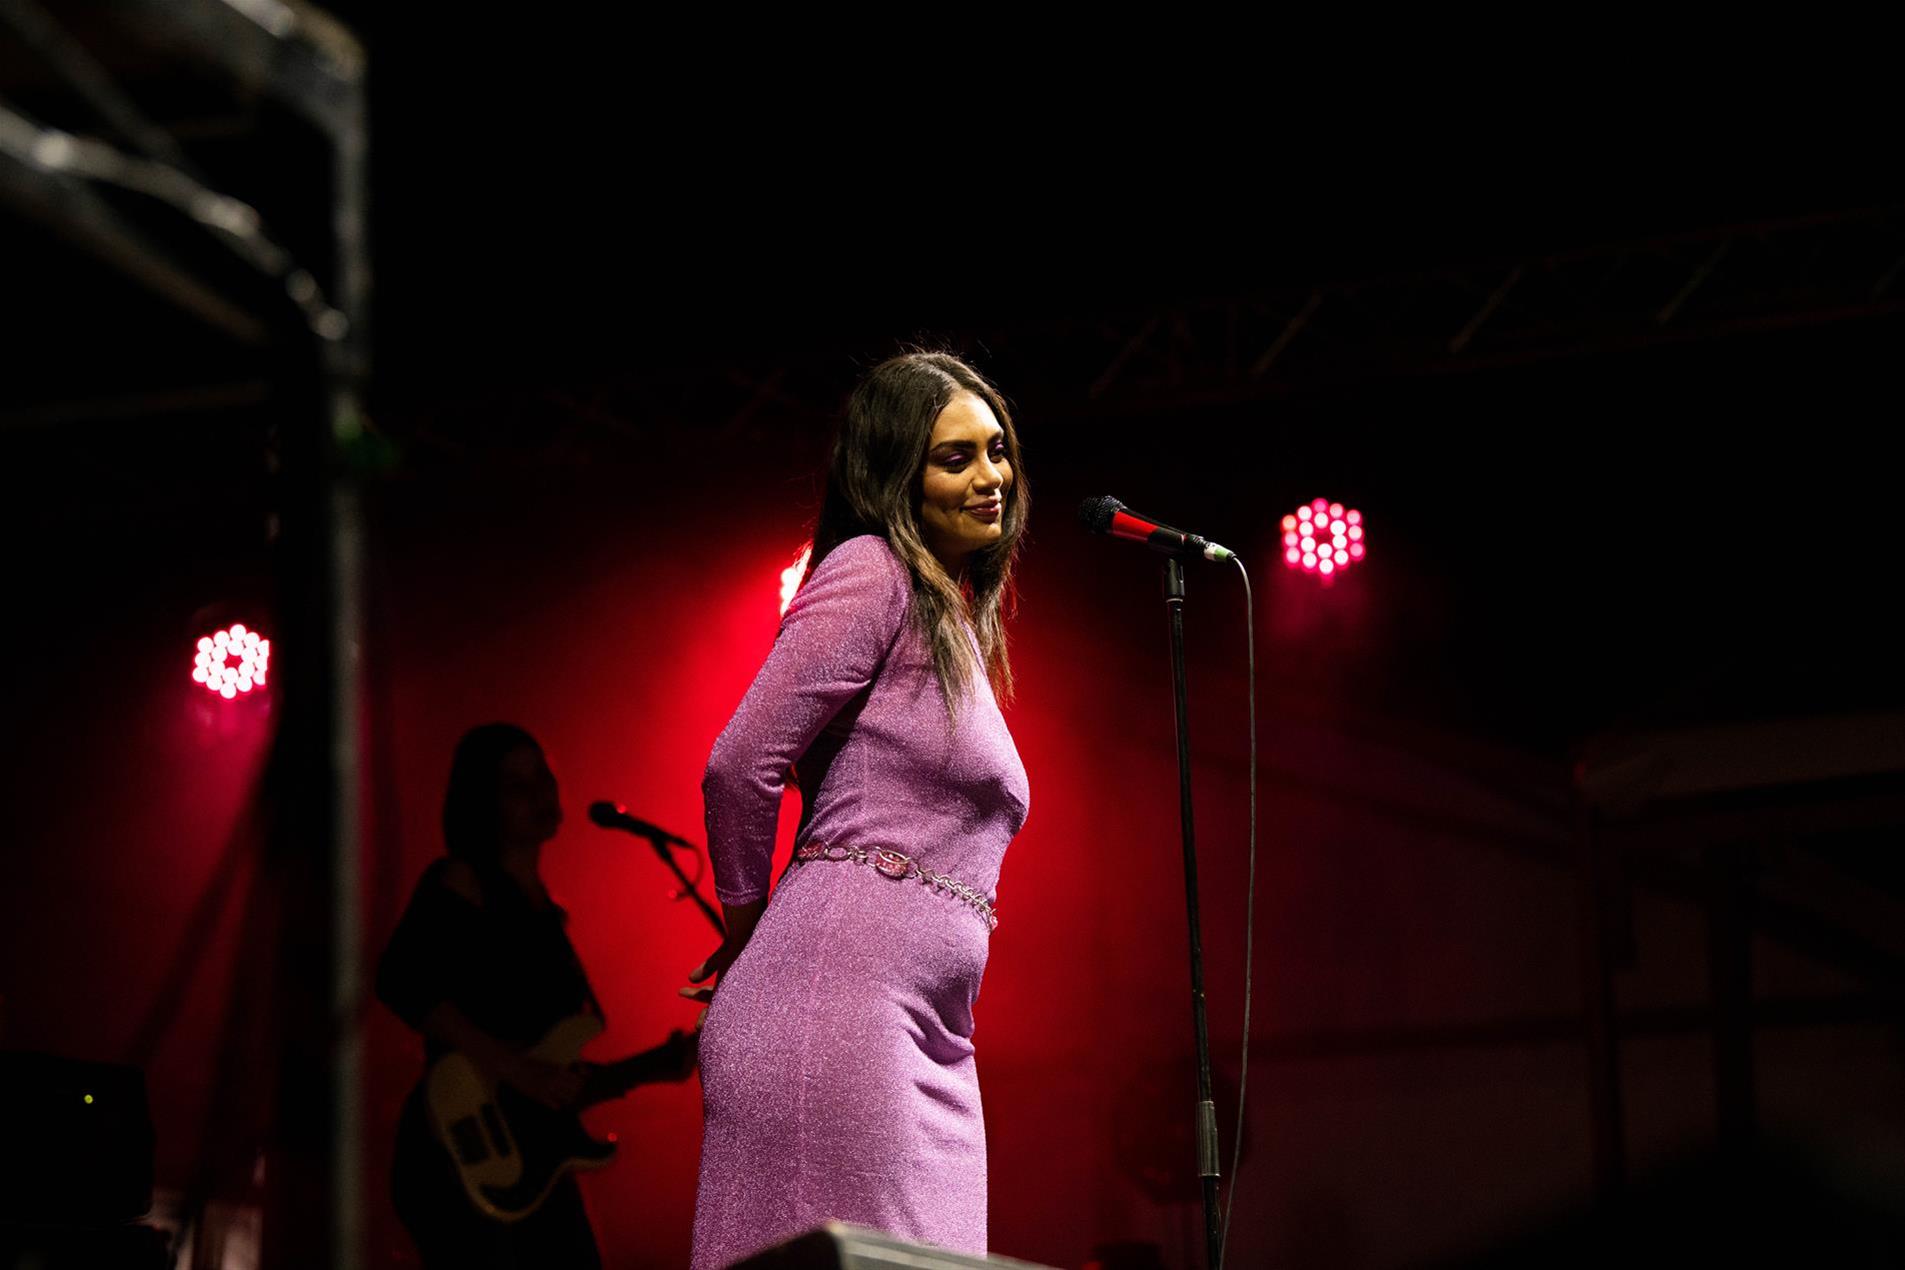 A solo female artist standing next to a microphone on stage.